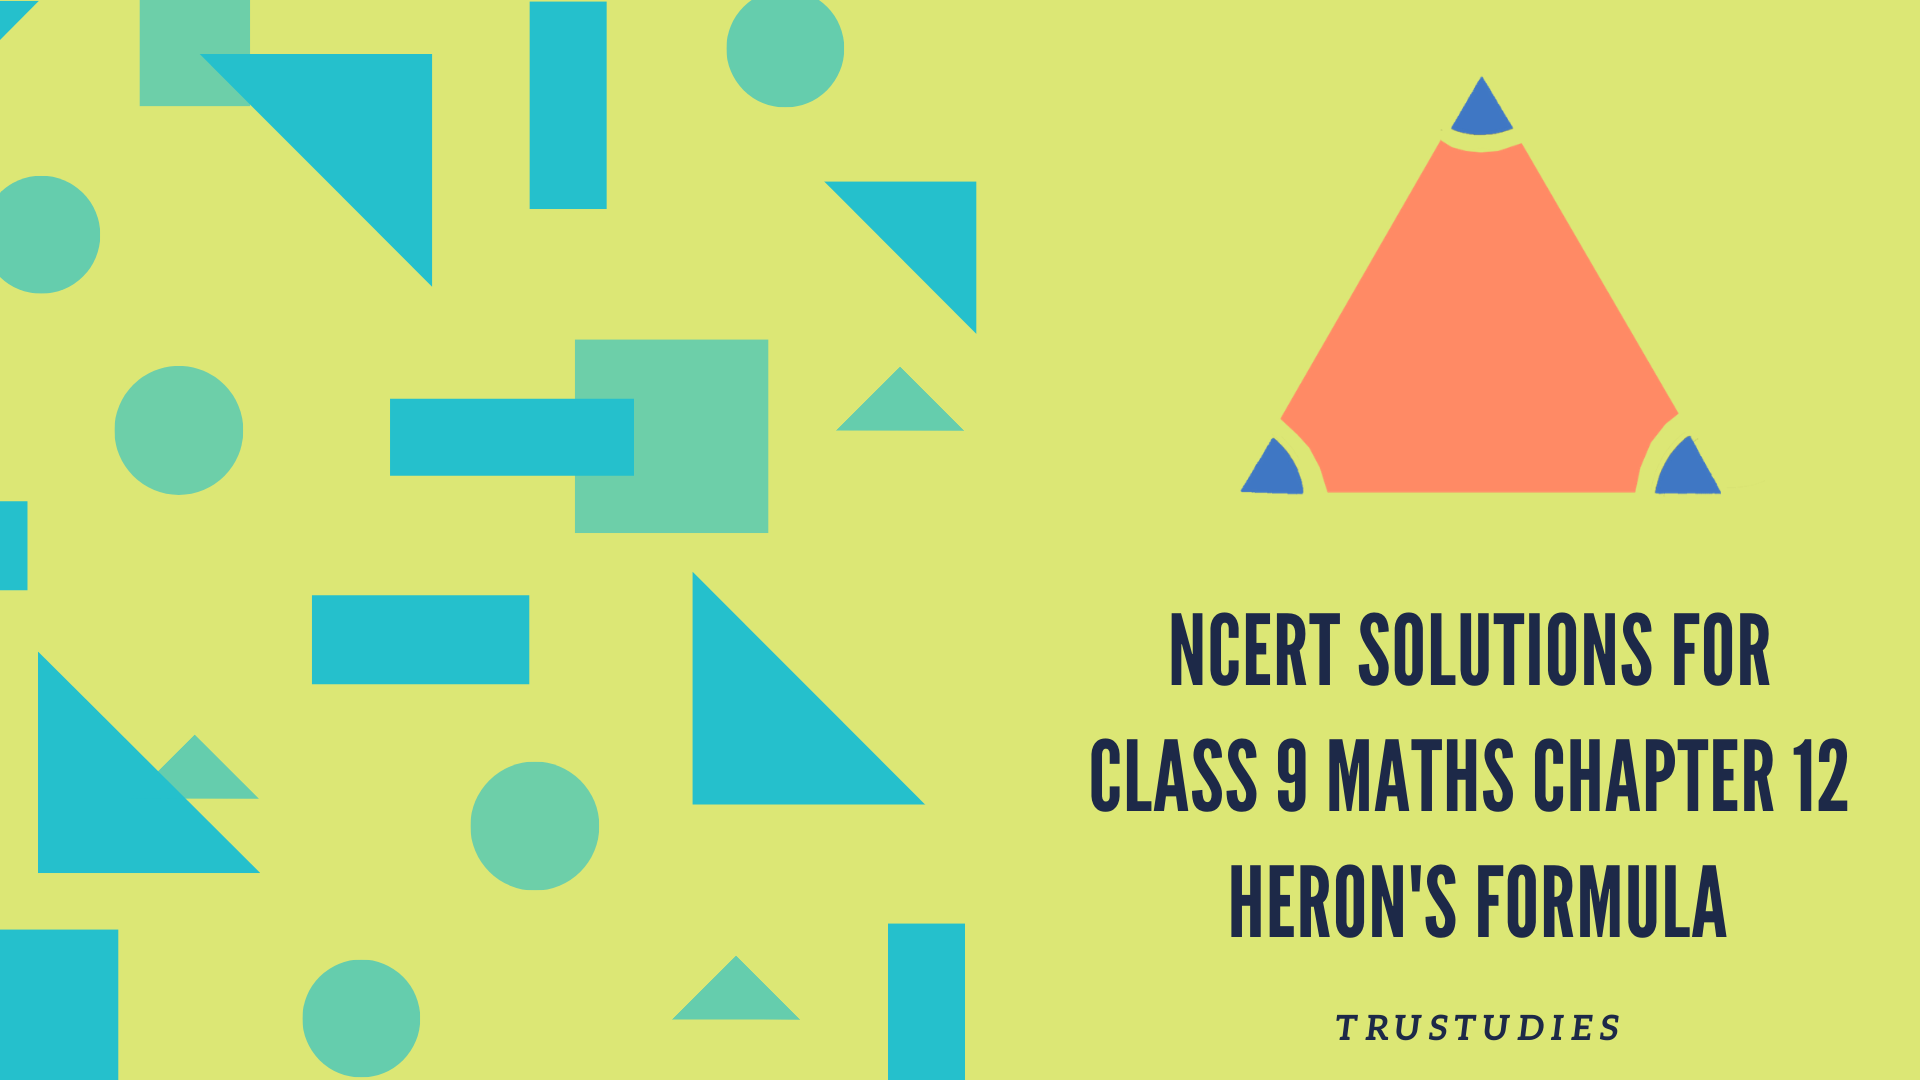 NCERT solutions for class 9 maths chapter 12 herons formula banner image